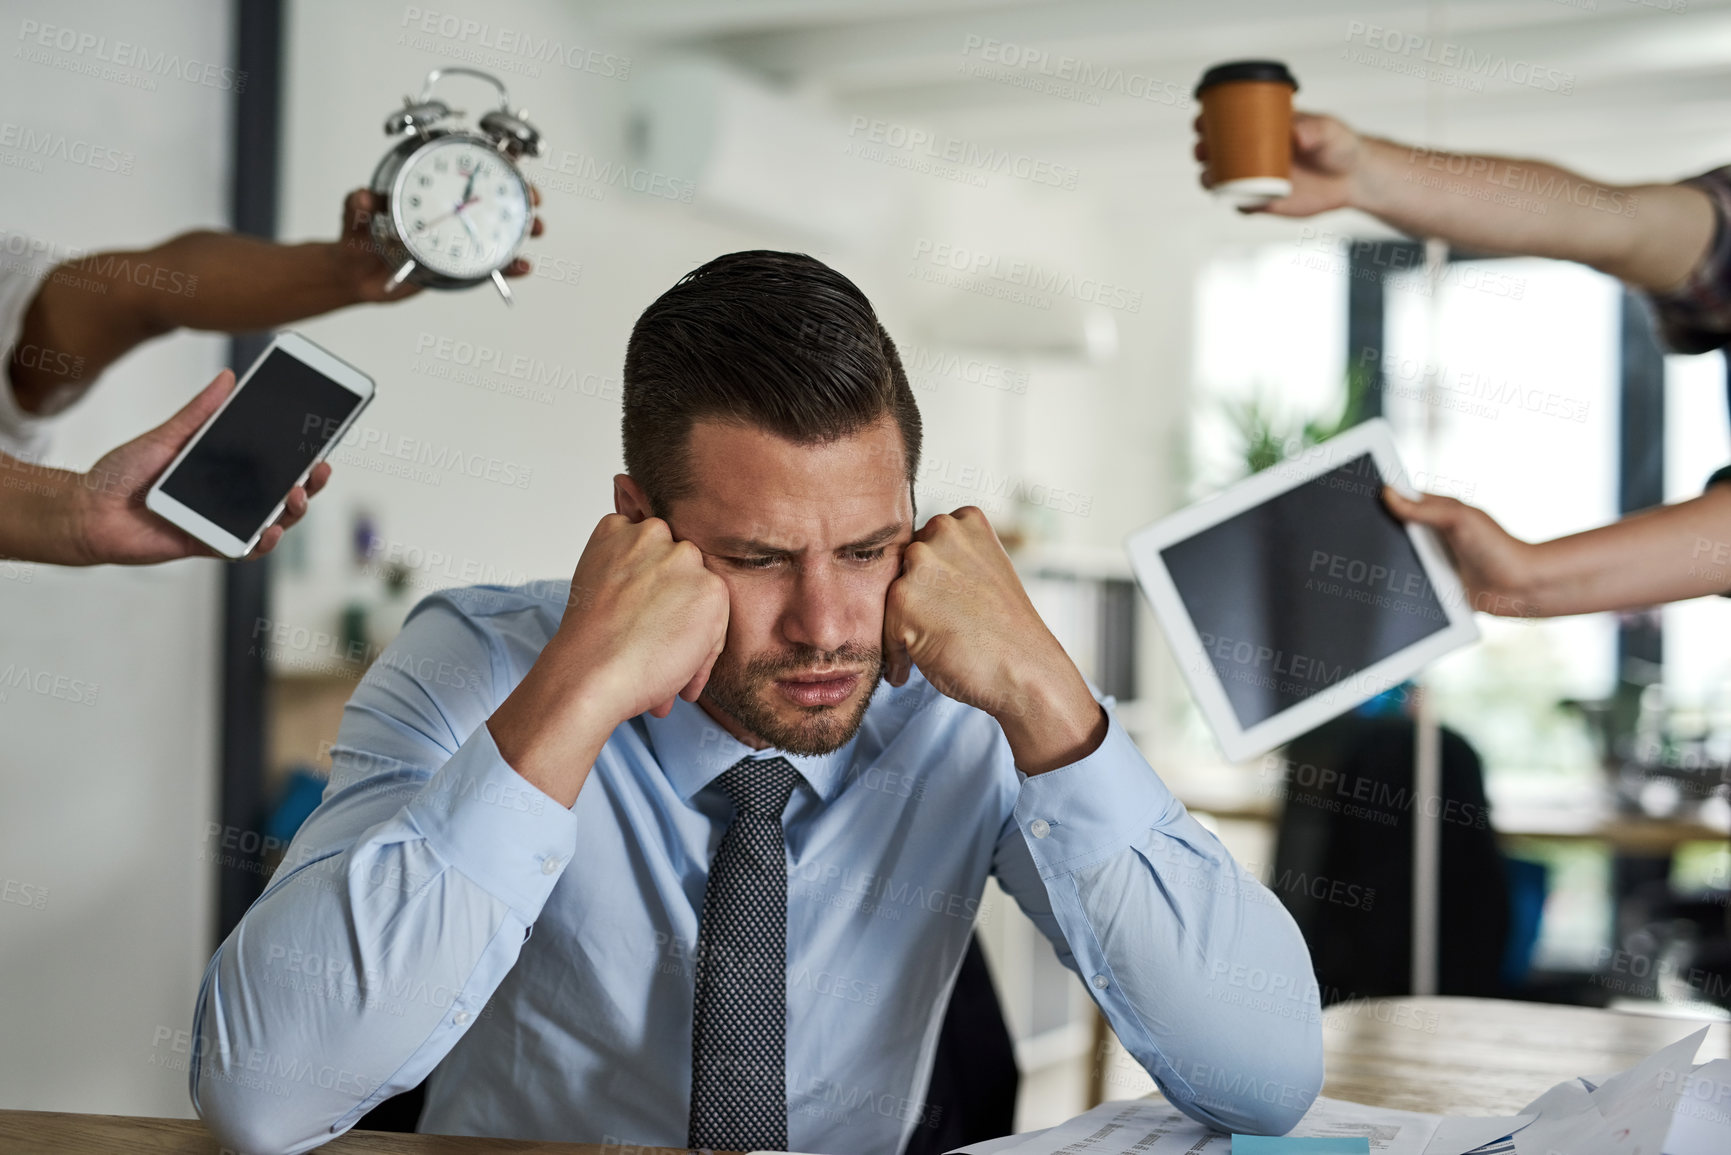 Buy stock photo Shot of a stressed out businessman surrounded by demanding colleagues in an office